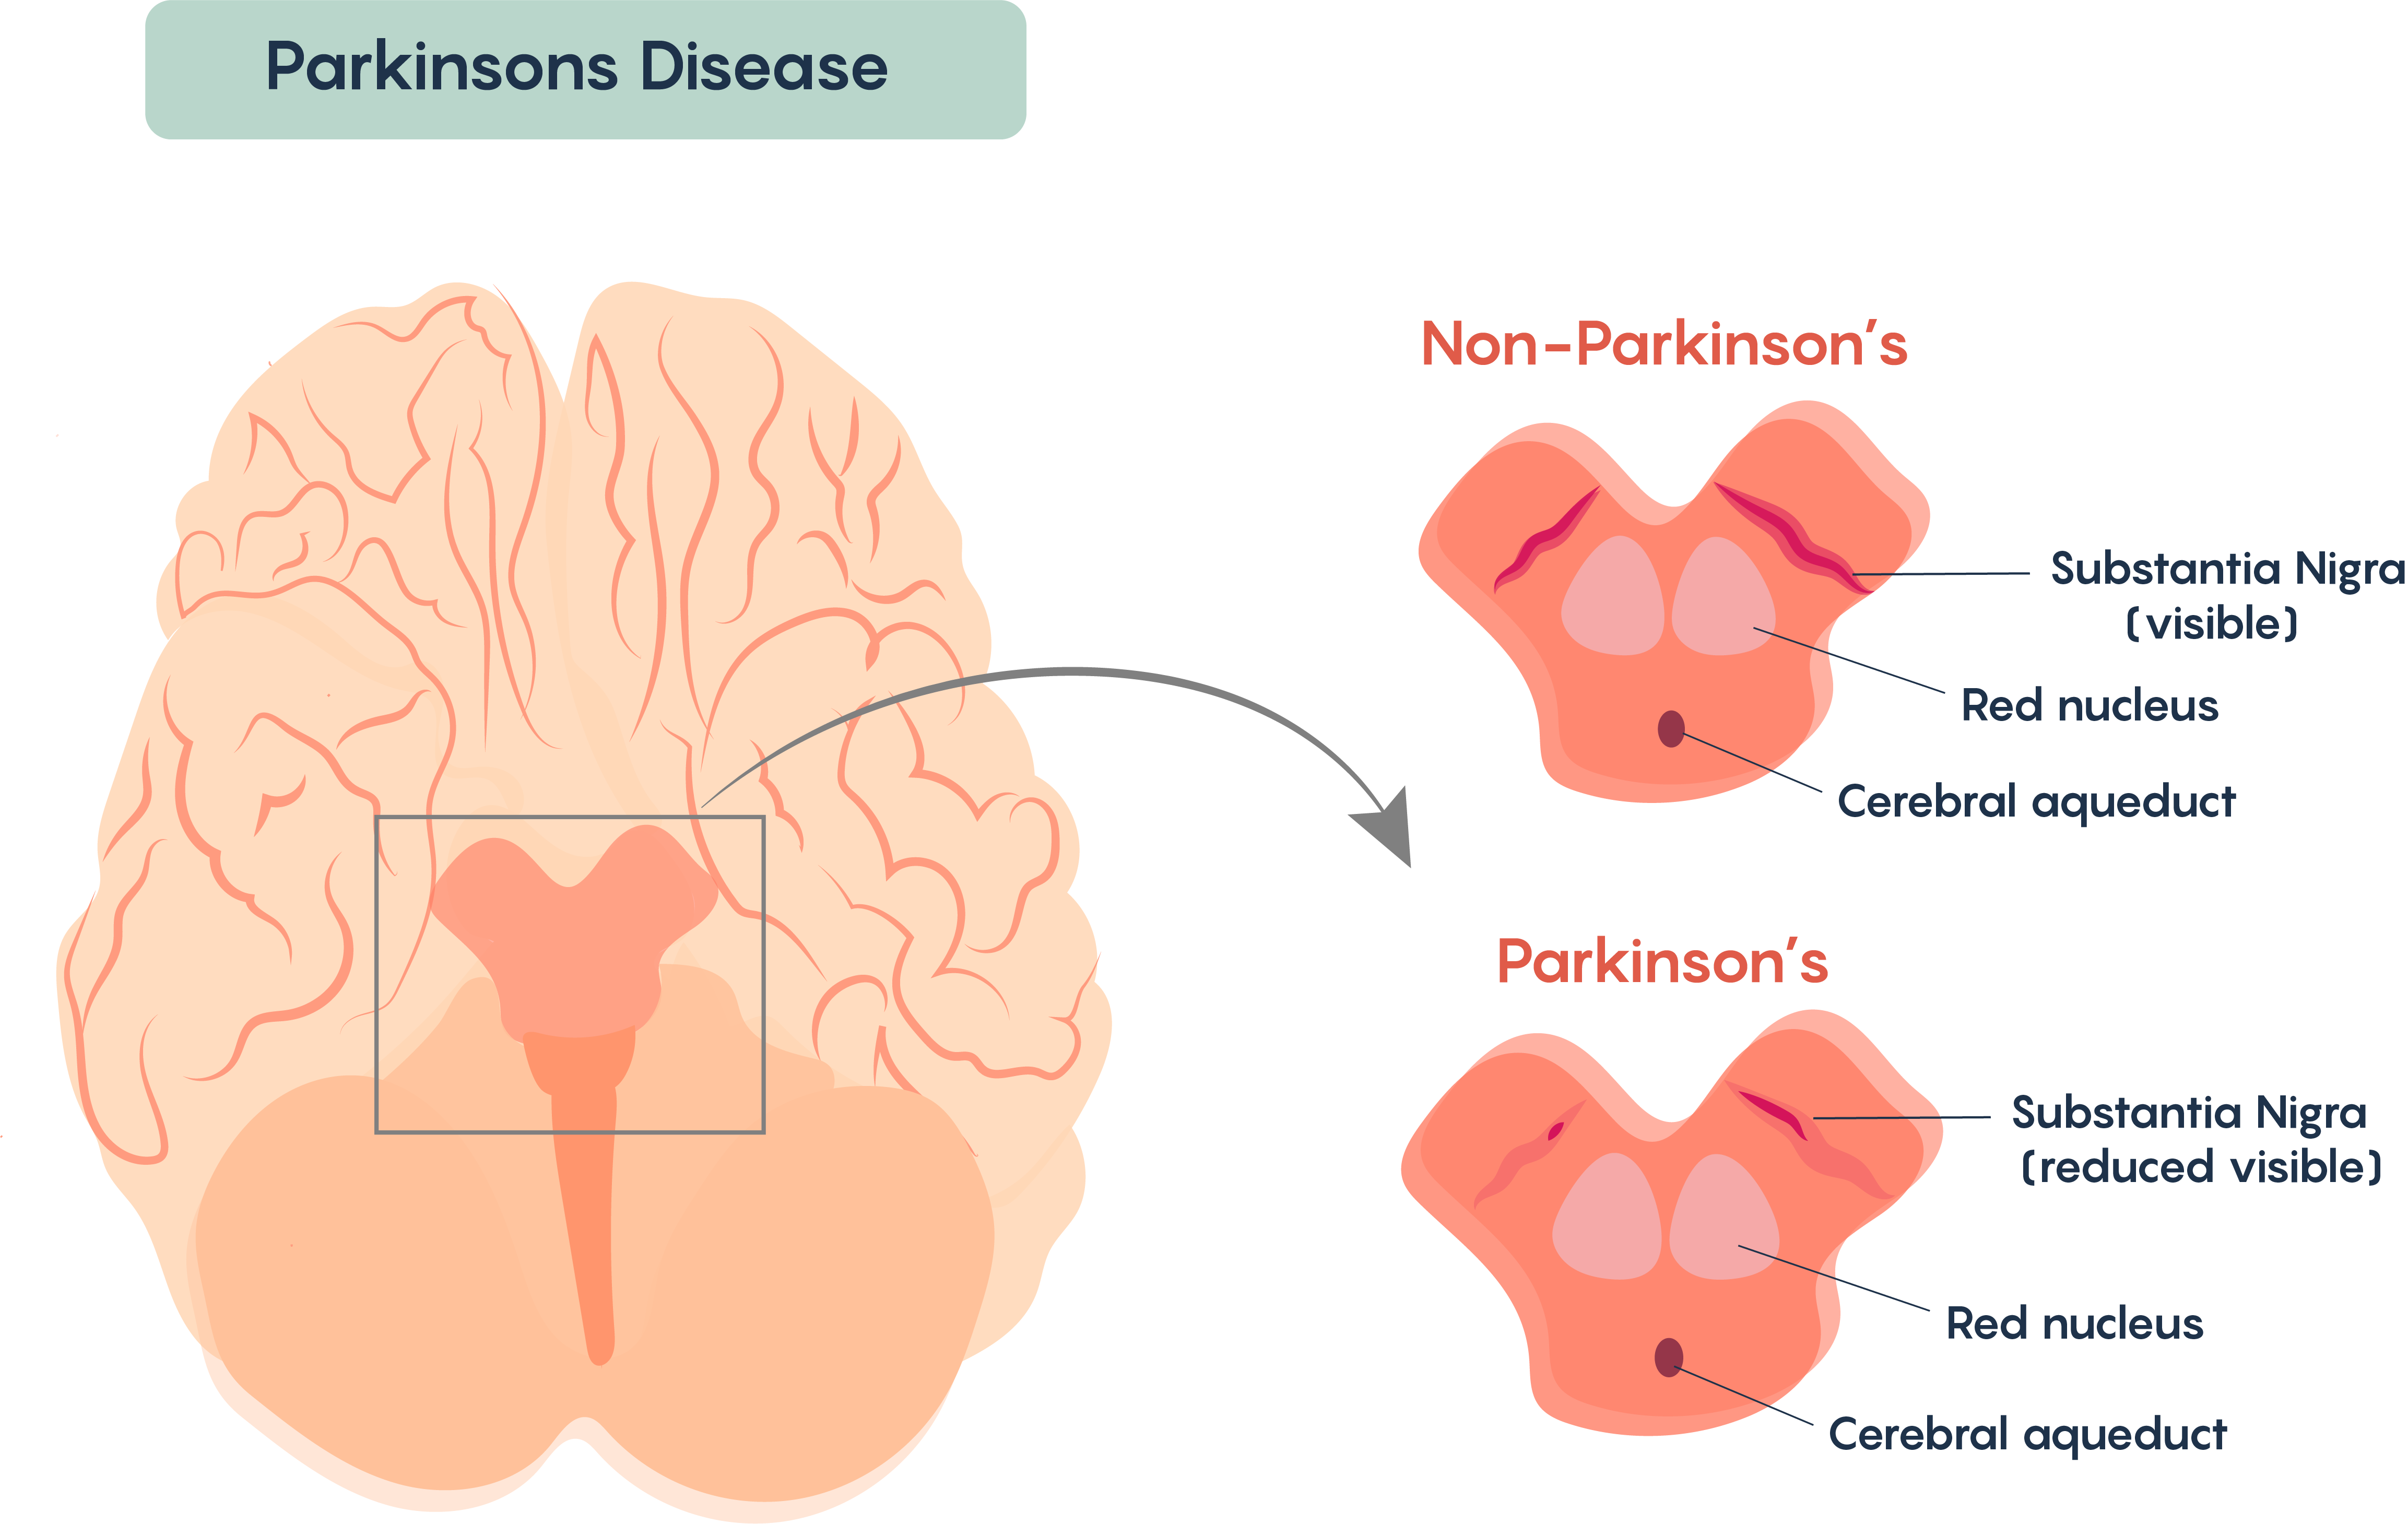 Loss of the pigmented dopaminergic neurons within the Substantia Nigra of individuals with Parkinson’s Disease.